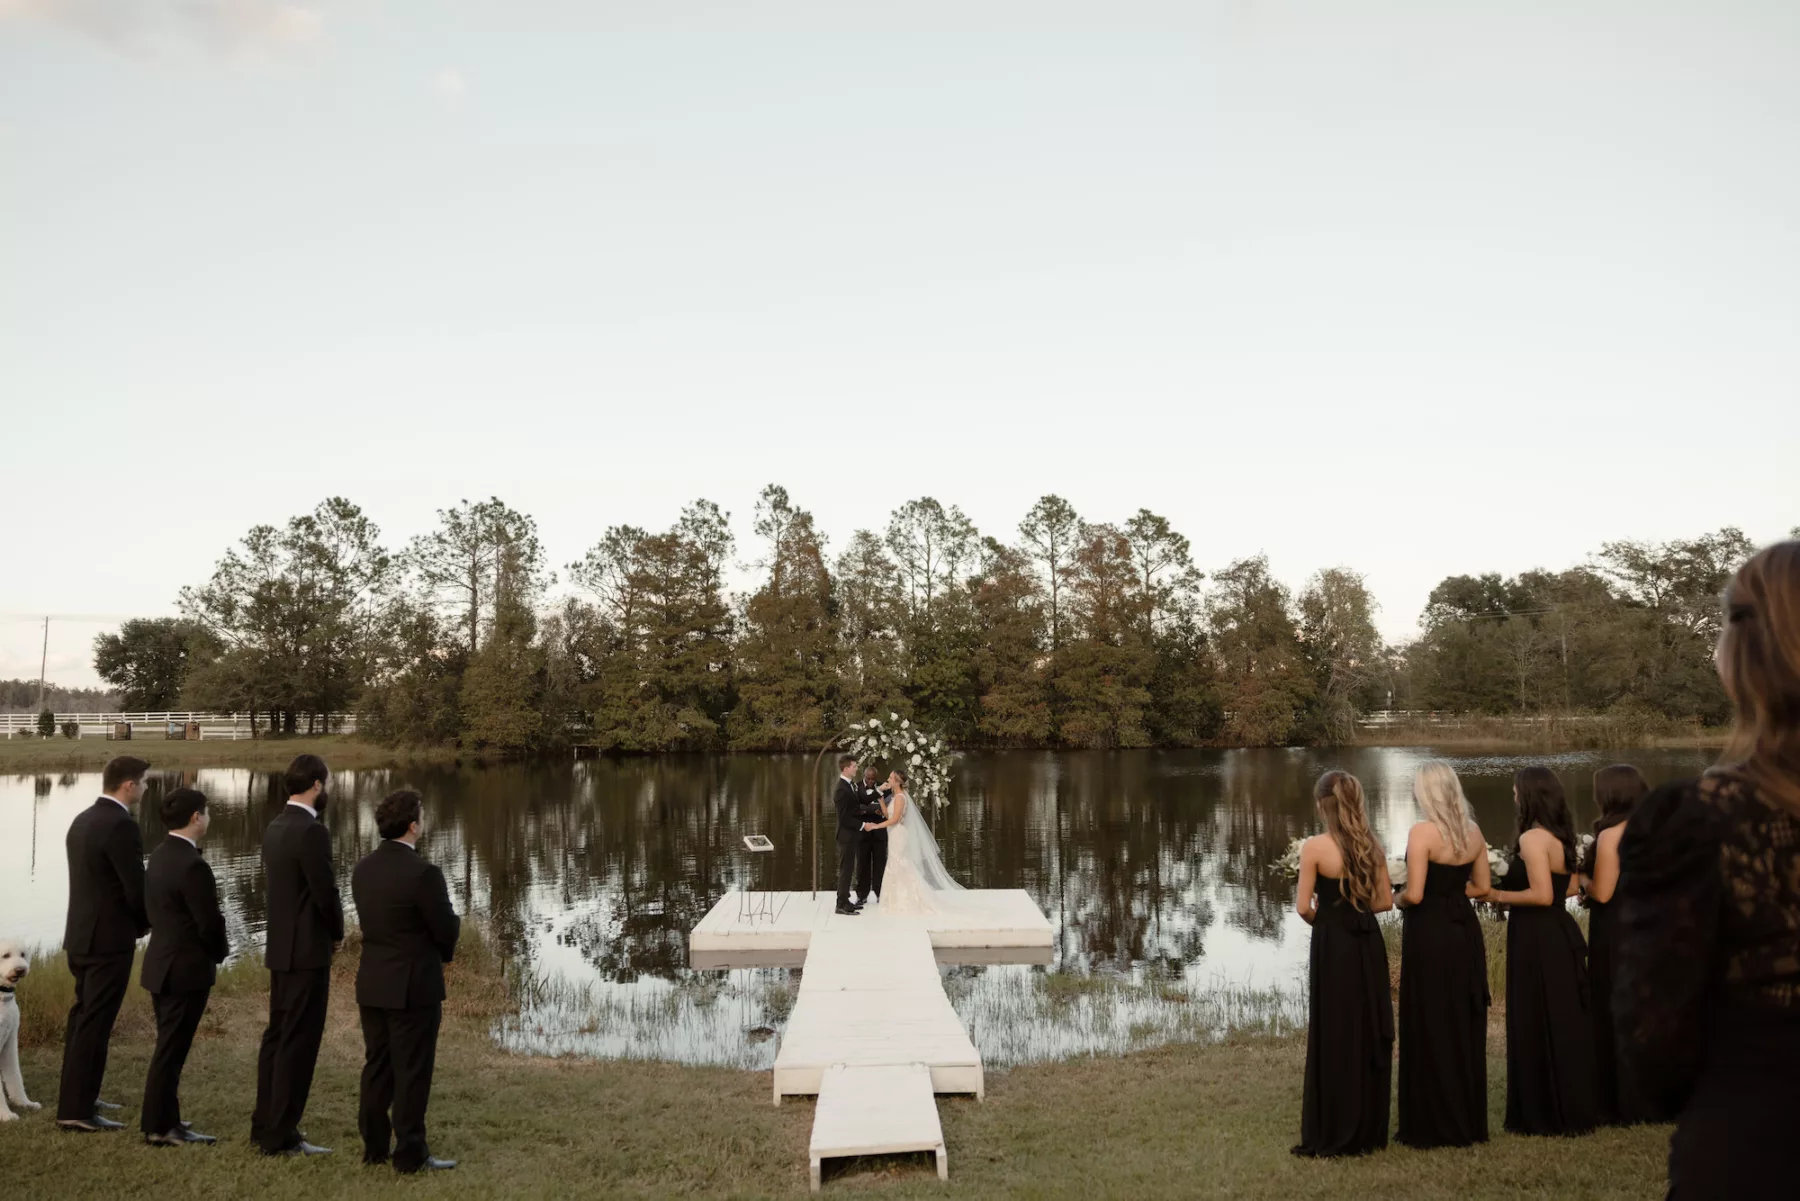 Waterfront Dock Fall Wedding Ceremony Inspiration | Central Florida Photographer and Videographer Evoke Photo and Film